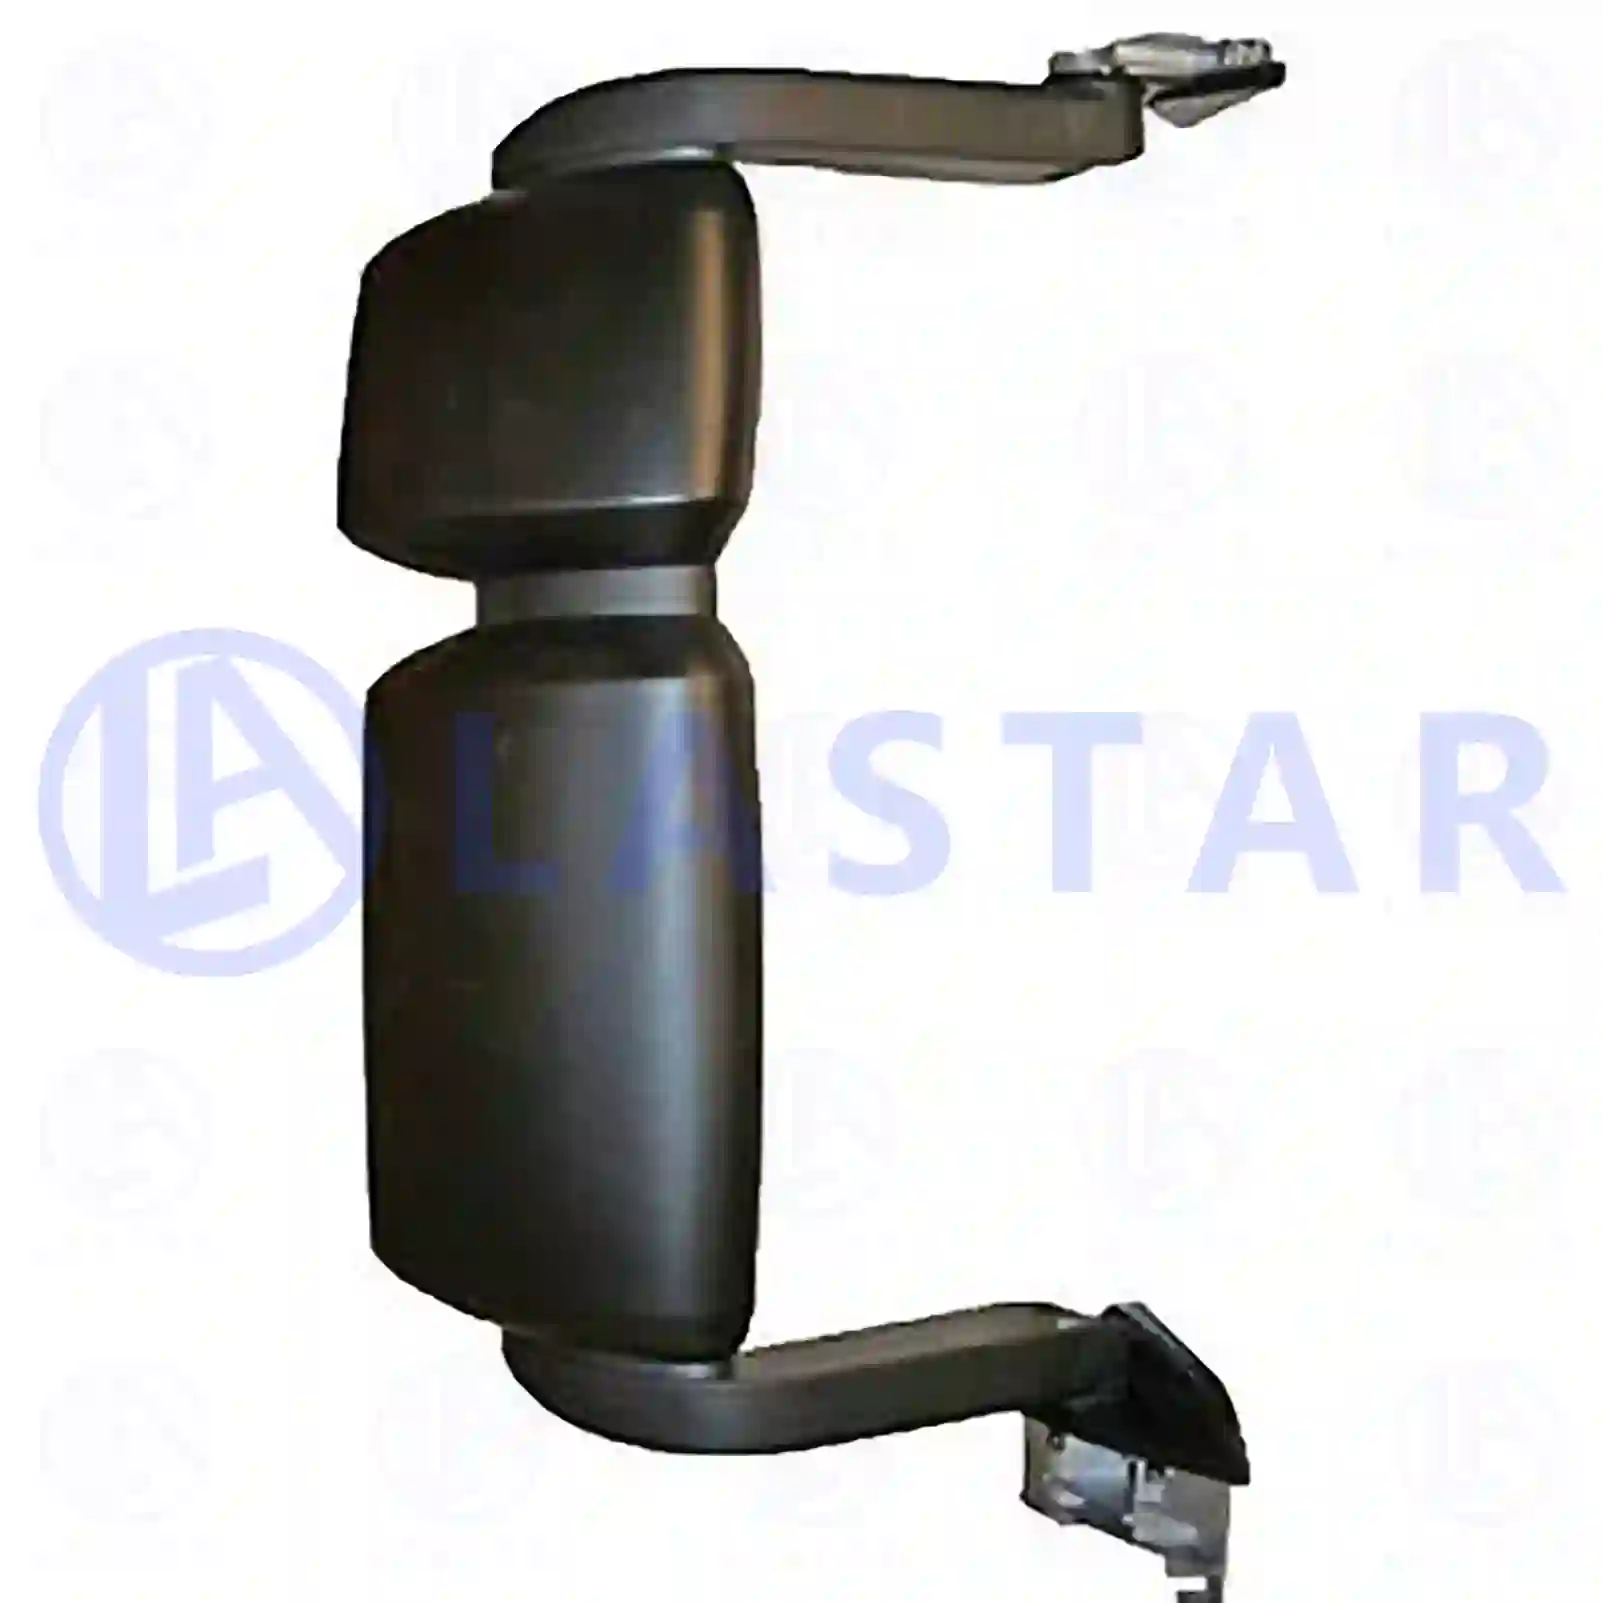 Main mirror, complete, right, heated, electrical, 77720821, 504150558, 504369984, ||  77720821 Lastar Spare Part | Truck Spare Parts, Auotomotive Spare Parts Main mirror, complete, right, heated, electrical, 77720821, 504150558, 504369984, ||  77720821 Lastar Spare Part | Truck Spare Parts, Auotomotive Spare Parts